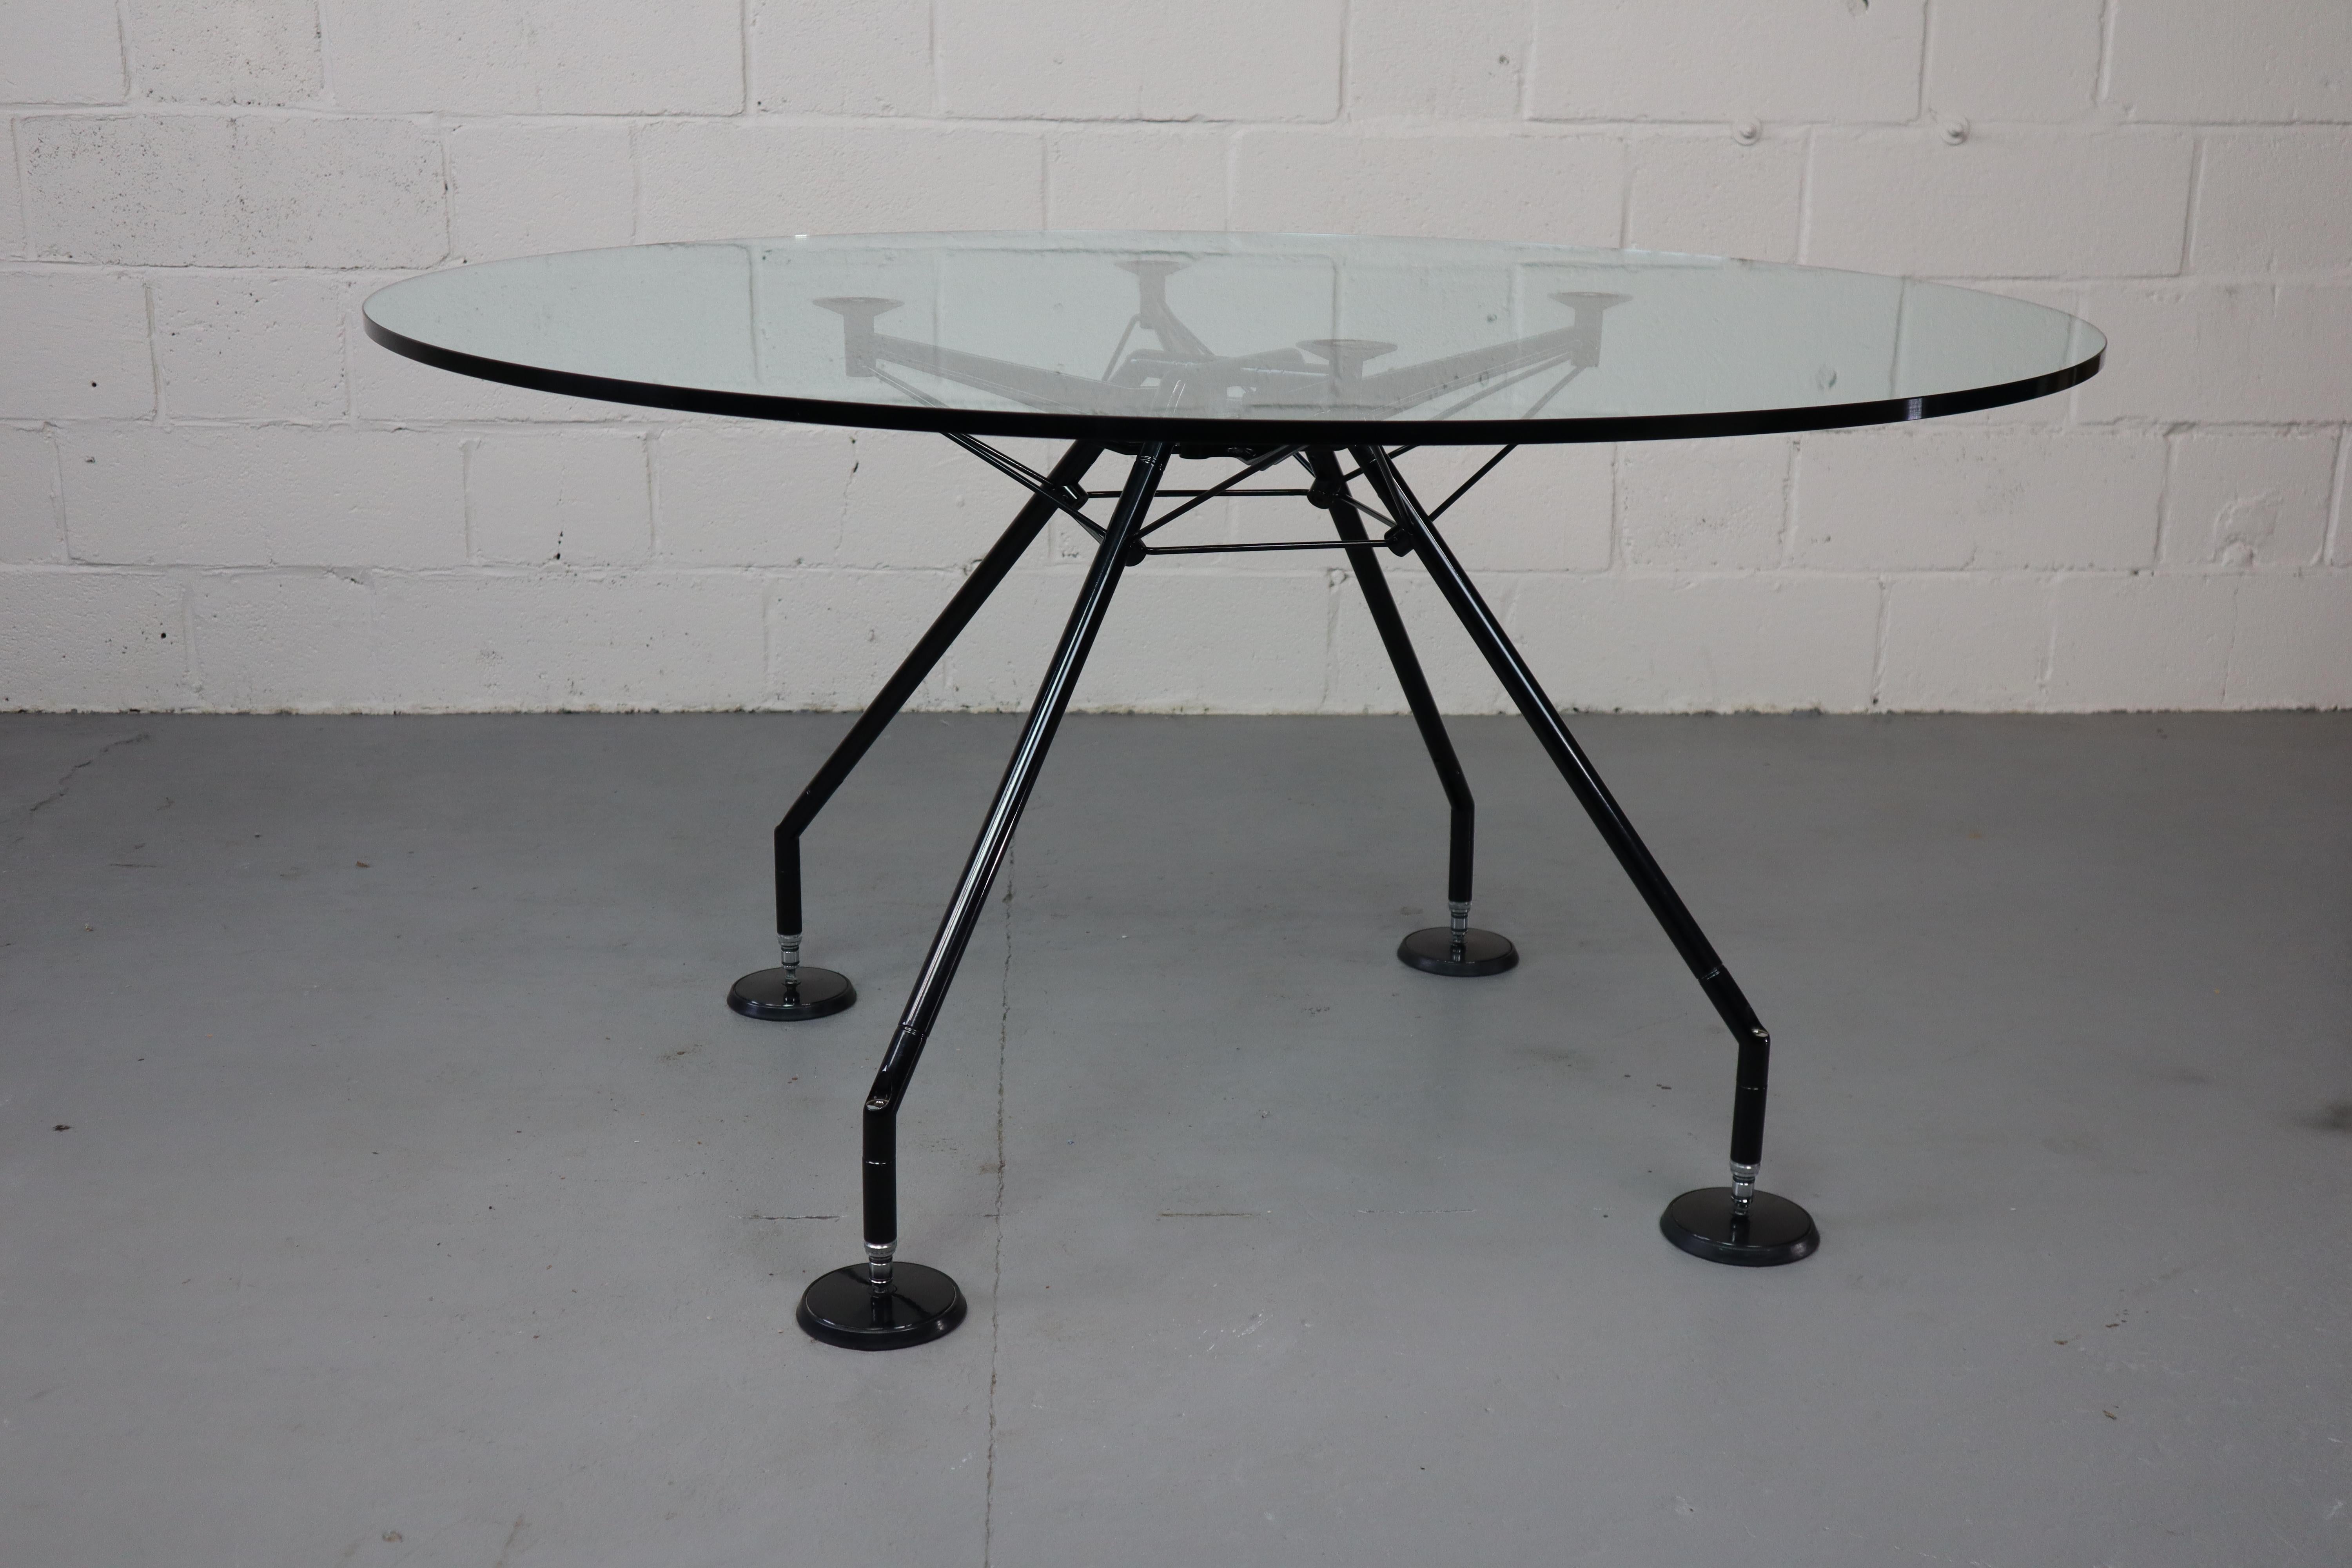 Nomos table by Norman Foster for Tecno, 1987.
The table has a transparant glass top (safety glass) and a black lacquered metal base. Height adjustable.
Winner of the prestigious 'Compasso d'Oro' in 1987.
This table is sure tot be an eye-catcher in